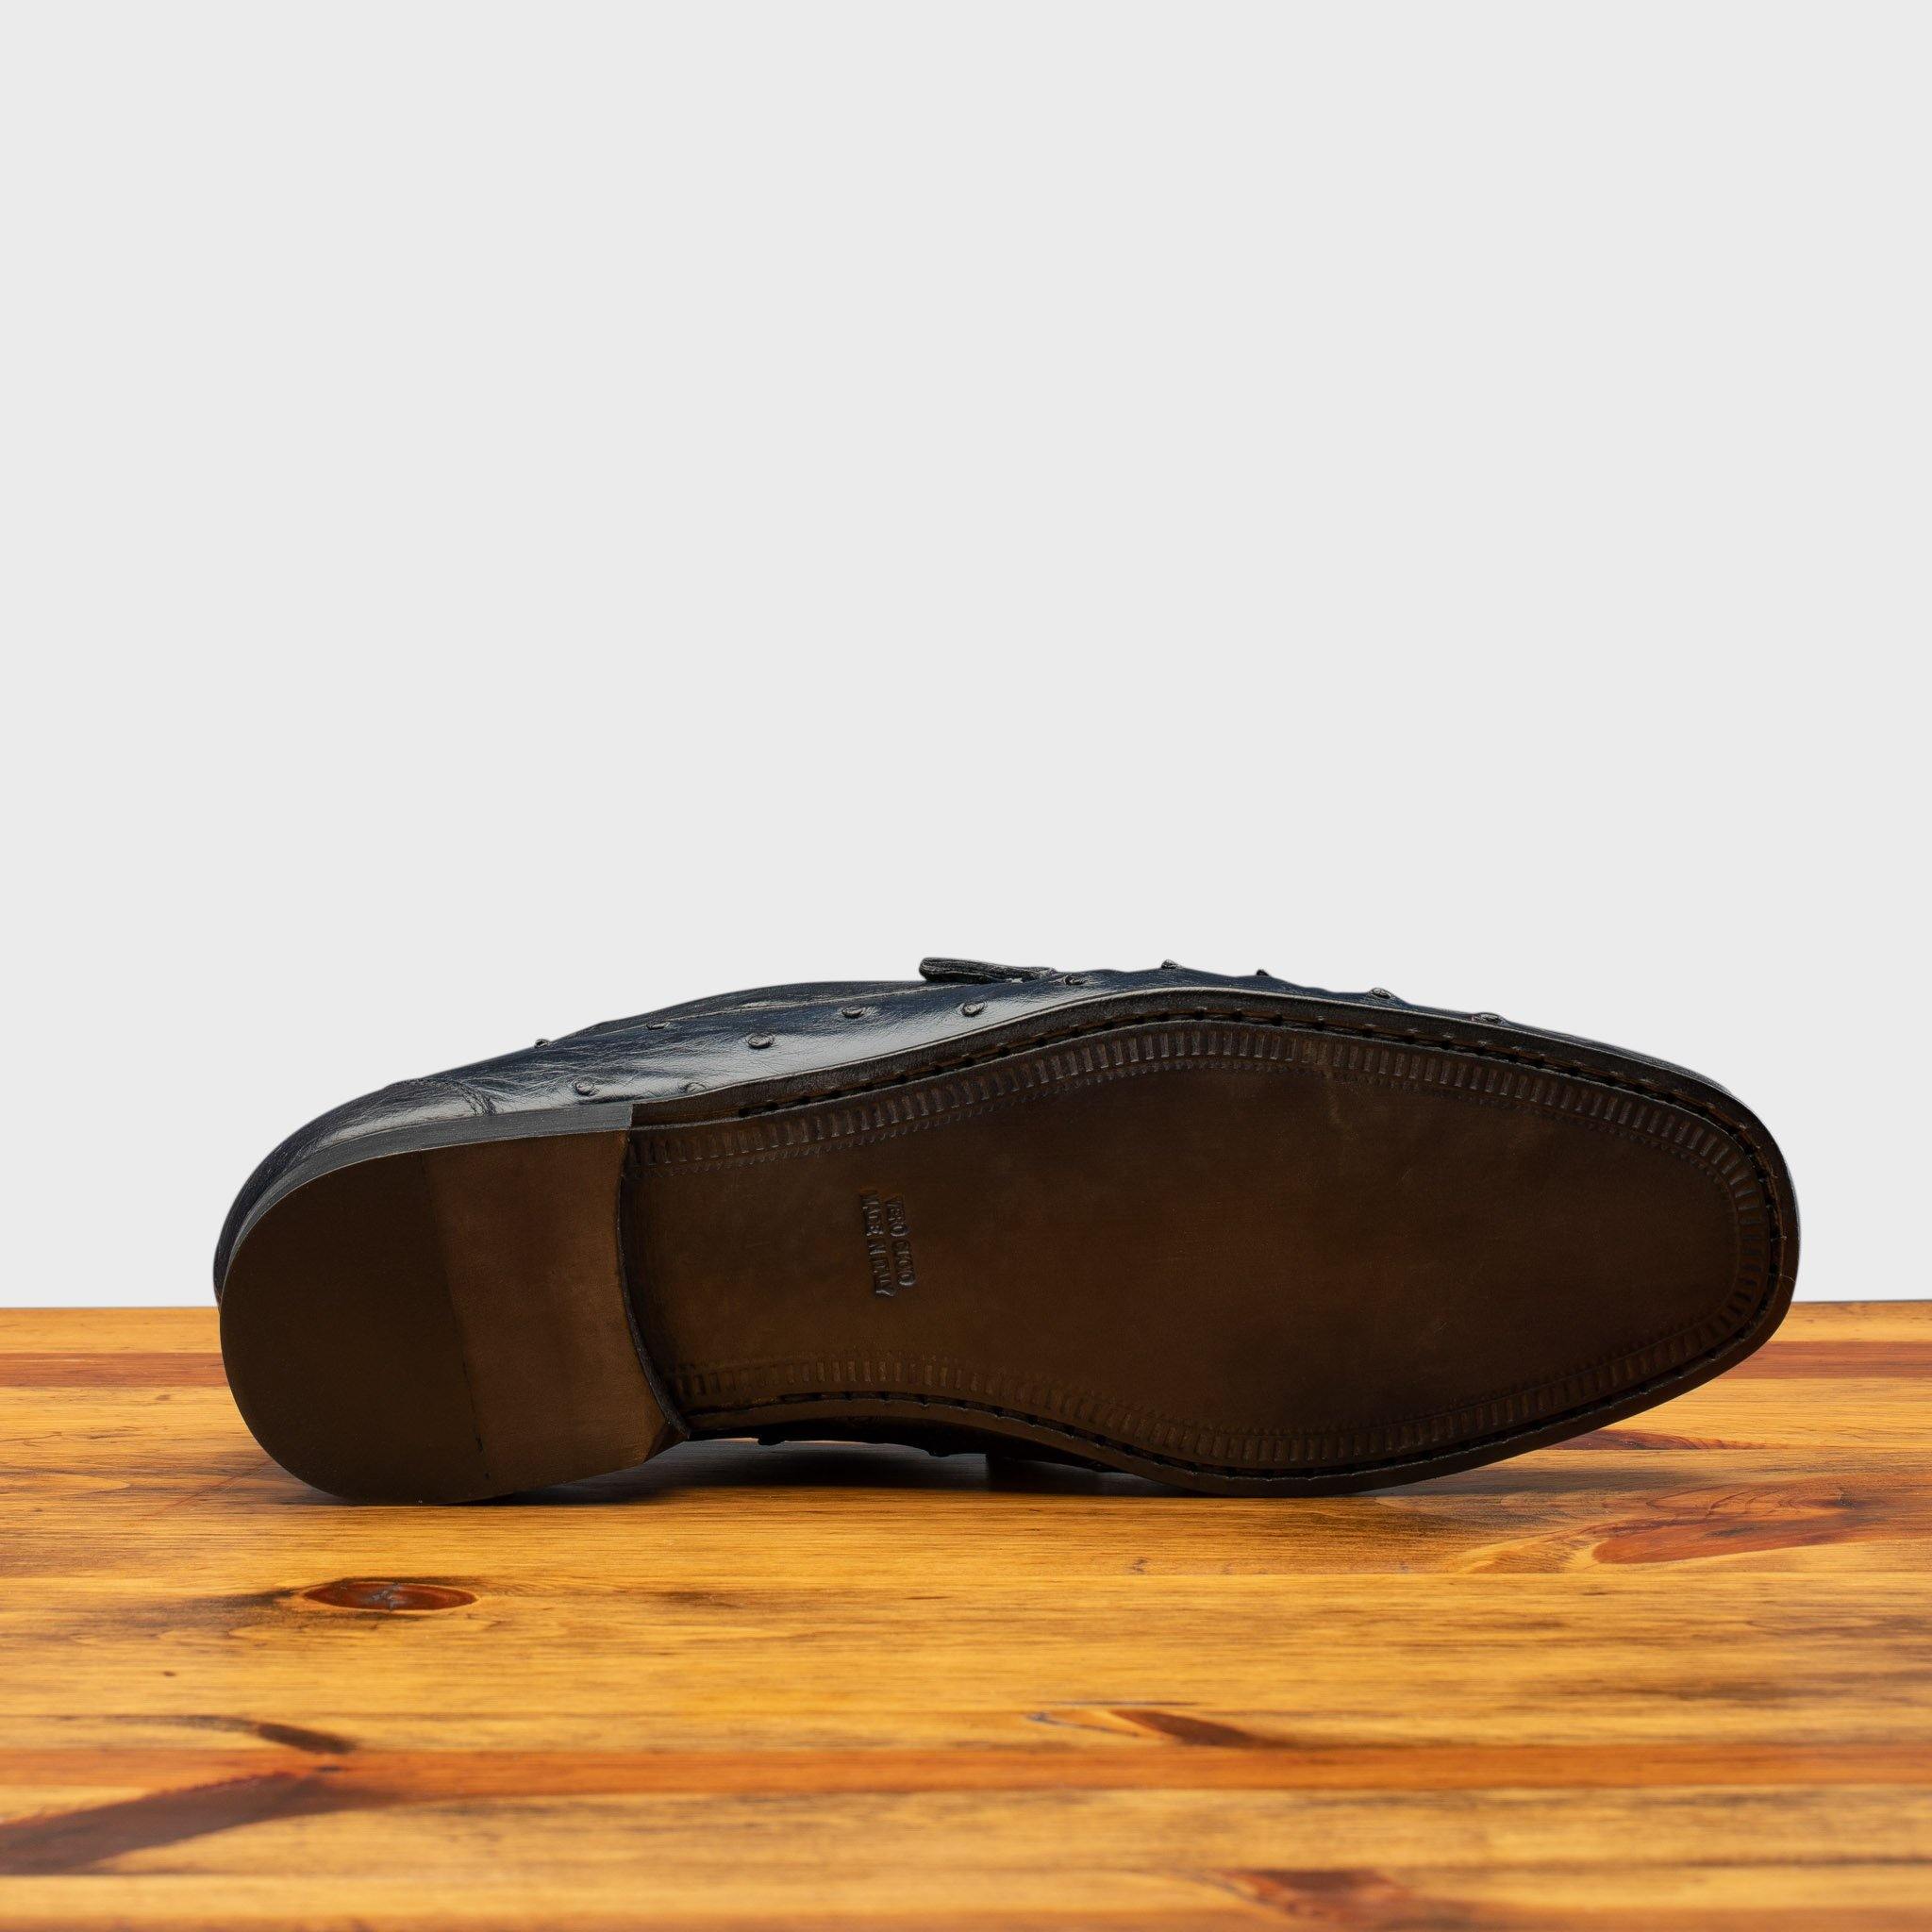 Full leather outsole of the 3238-M Calzoleria Toscana Ostrich Dress Slip-On on top of a wooden table